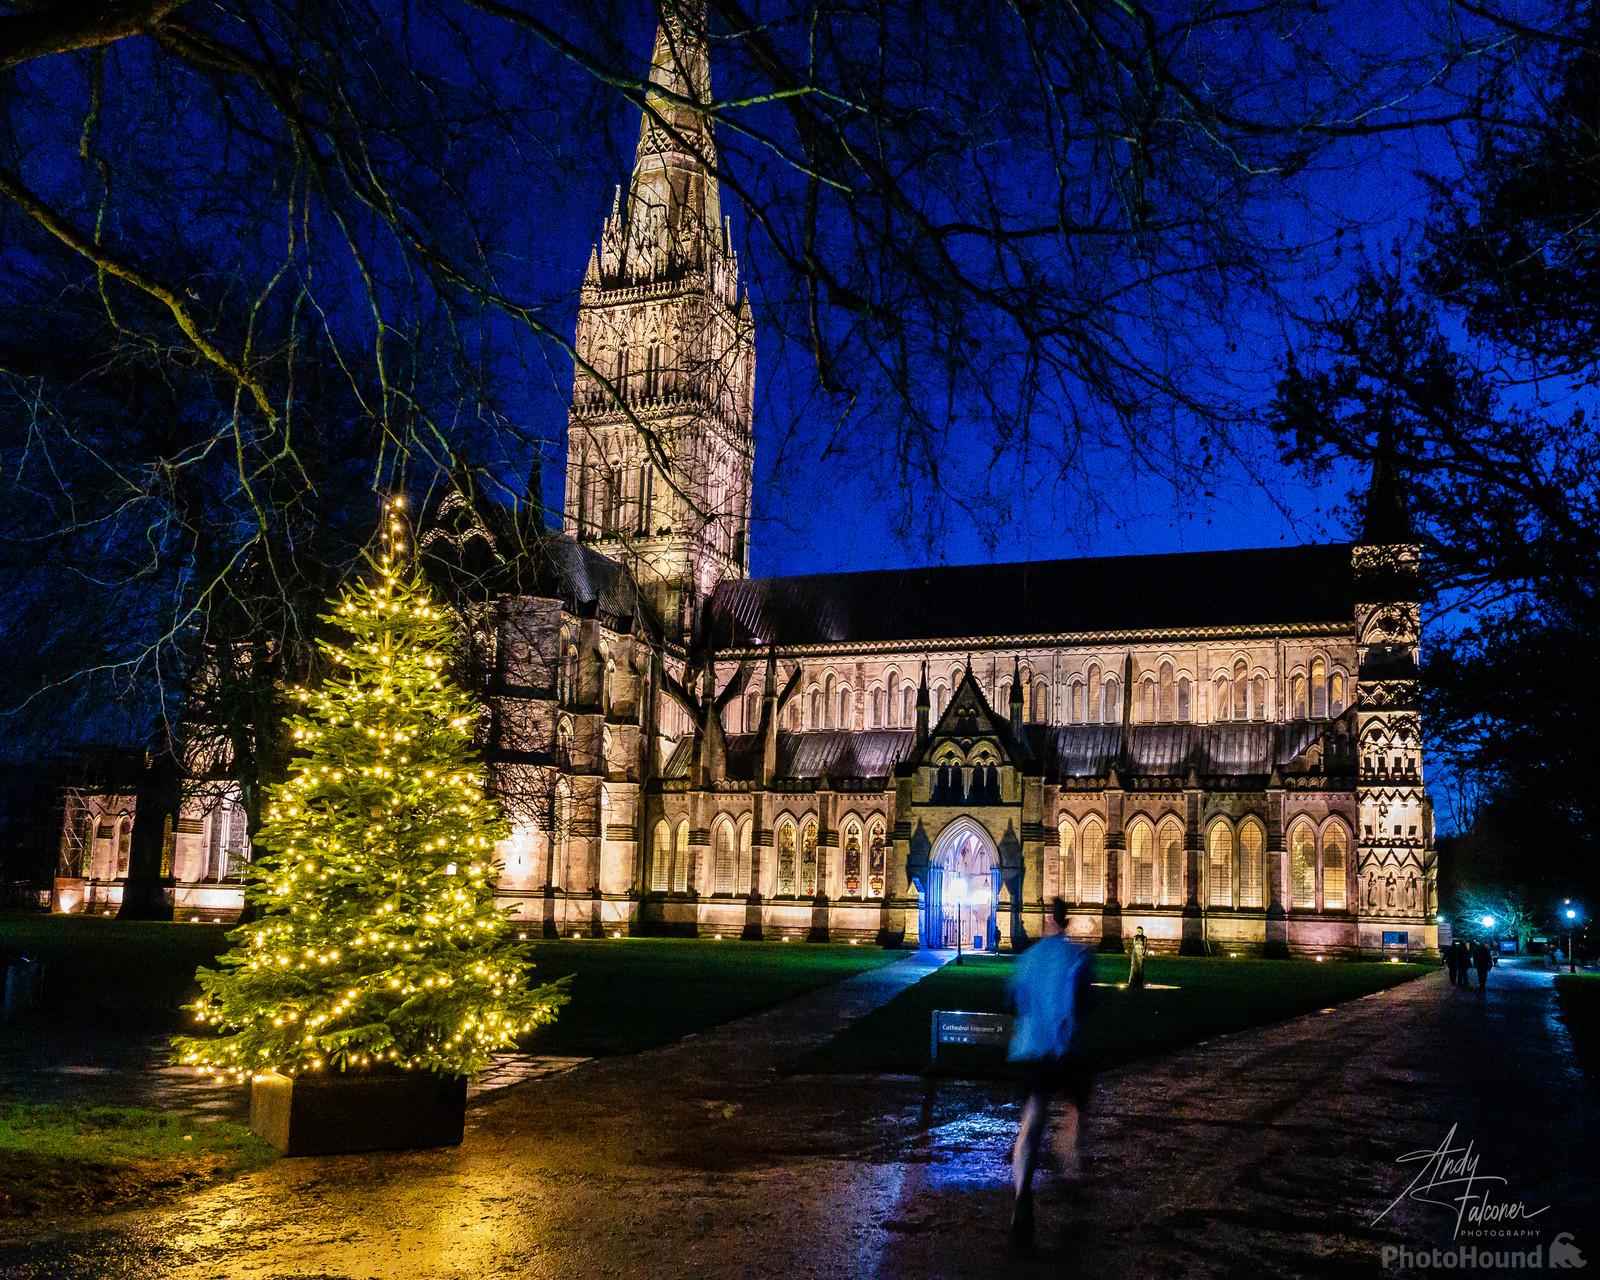 Image of Salisbury Cathedral - Exterior by Andy Falconer